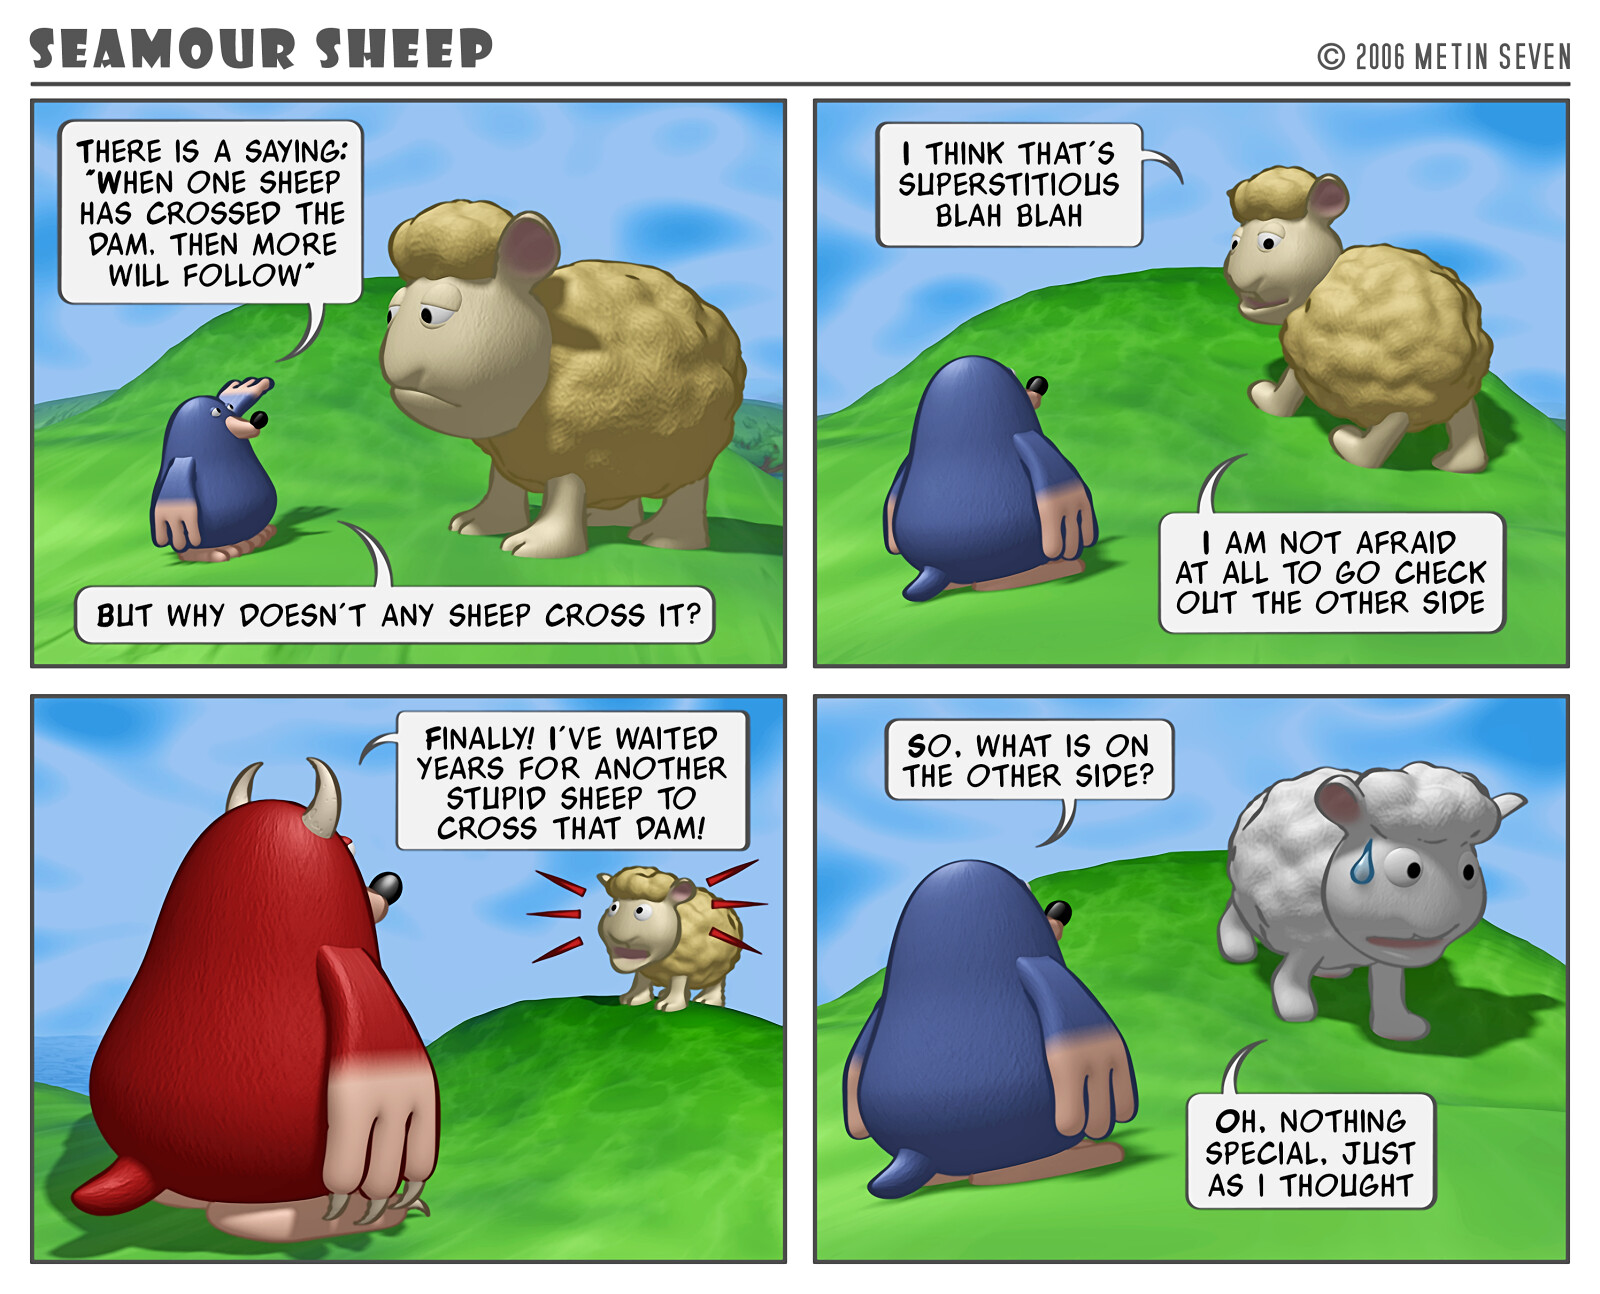 Seamour Sheep and Marty Mole comic strip episode: Superstition